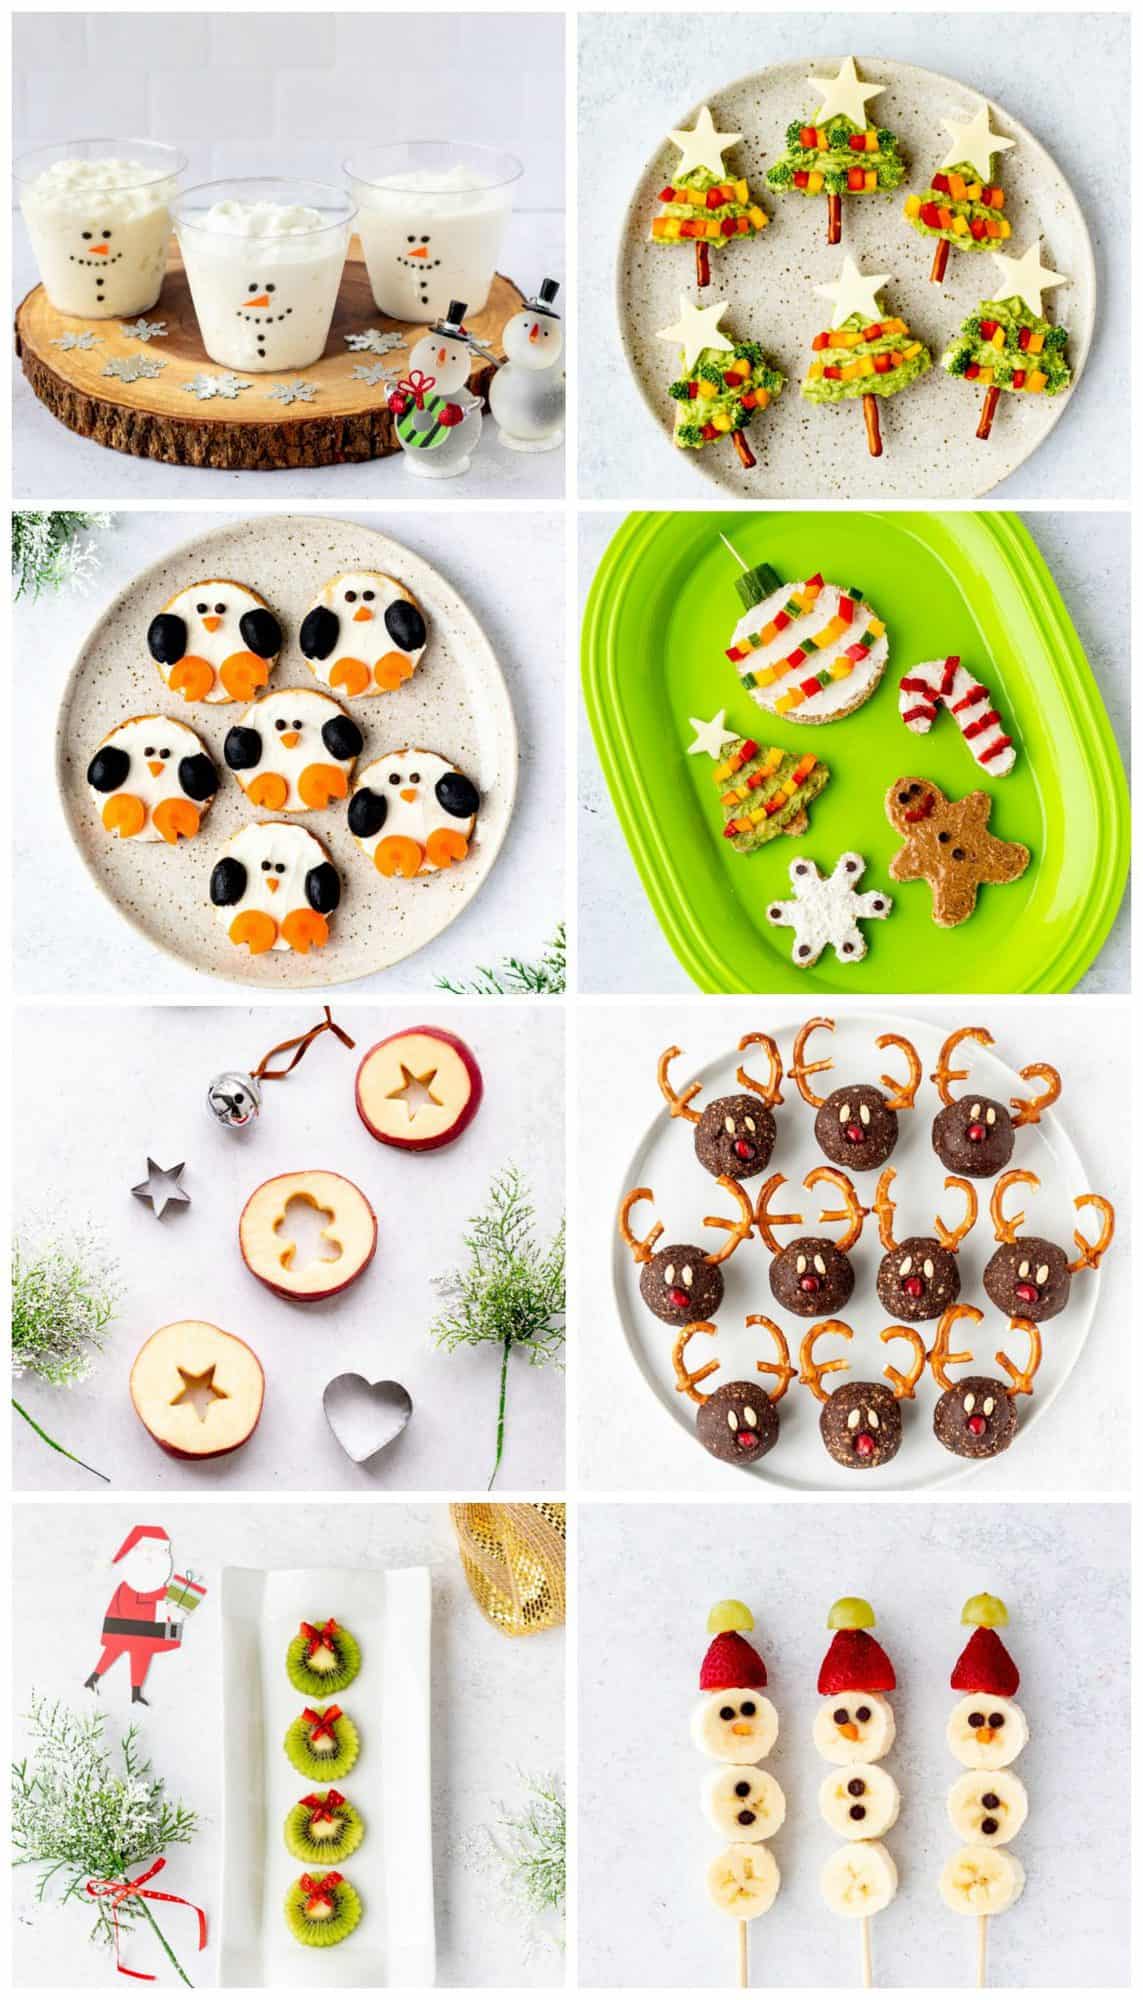 Healthy holiday snack recipe - Child Care Resource Center (CCRC)